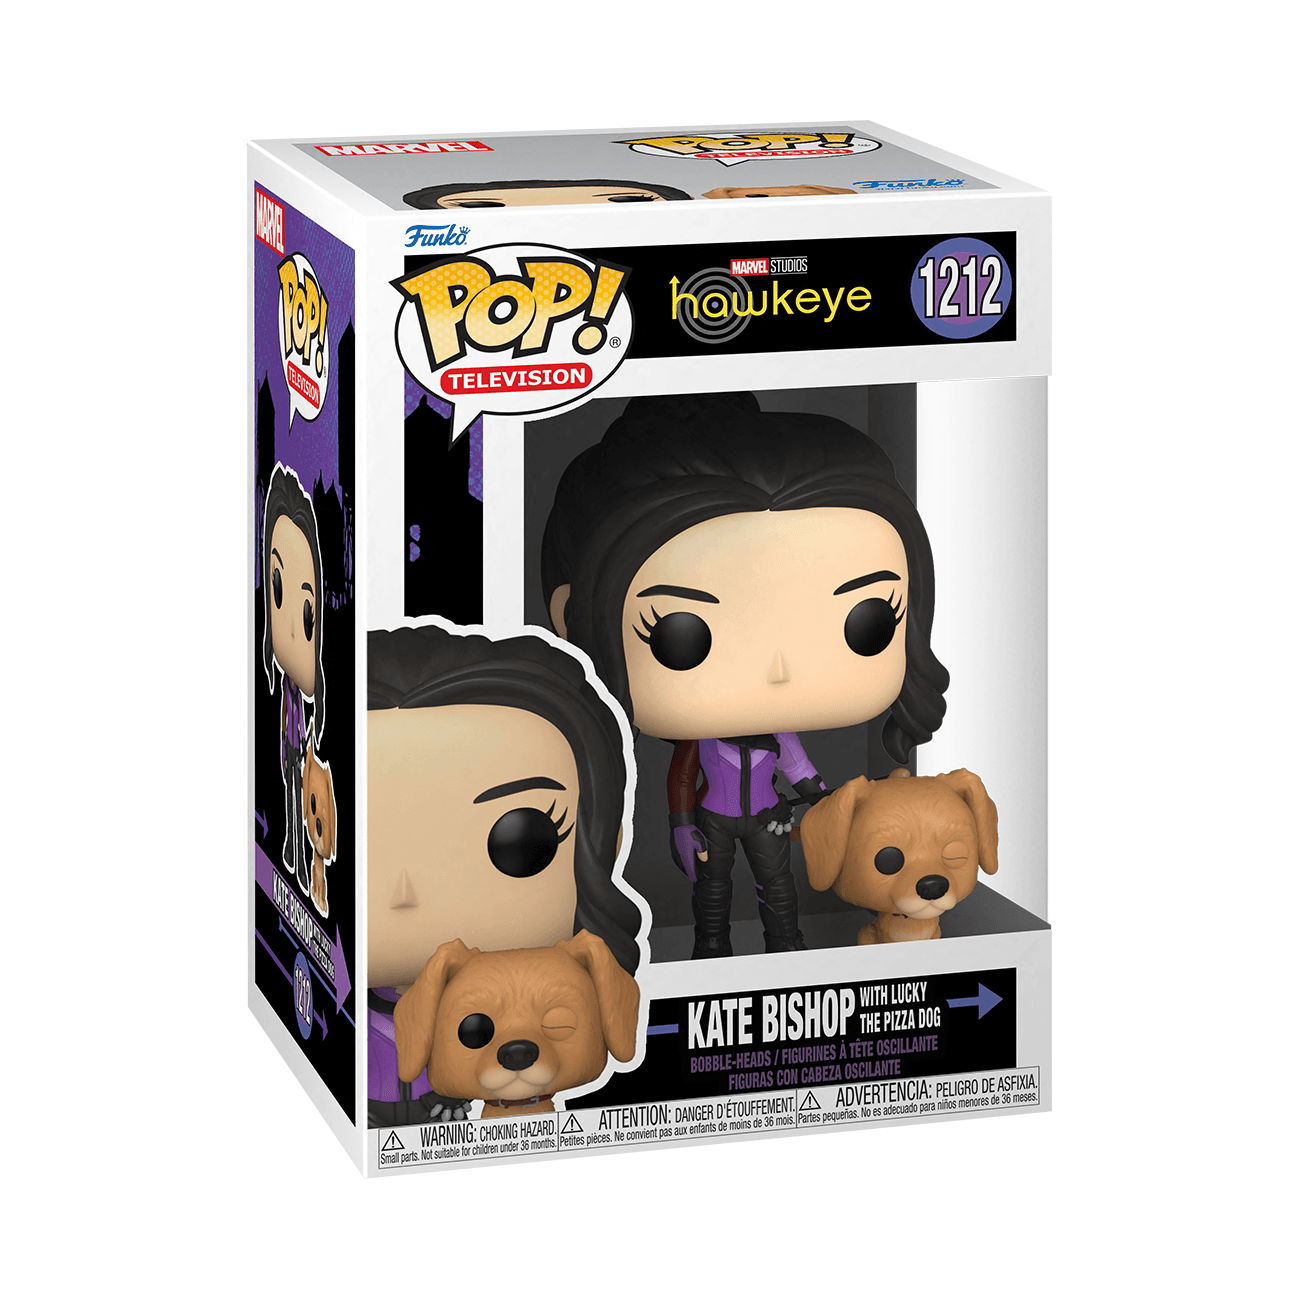 Funko Pop! & Buddy Marvel: Hawkeye - Kate Bishop with Lucky Pizza Dog - BumbleToys - 18+, Action Figures, Avengers, Boys, Figures, Funko, Girls, Marvel, Pre-Order